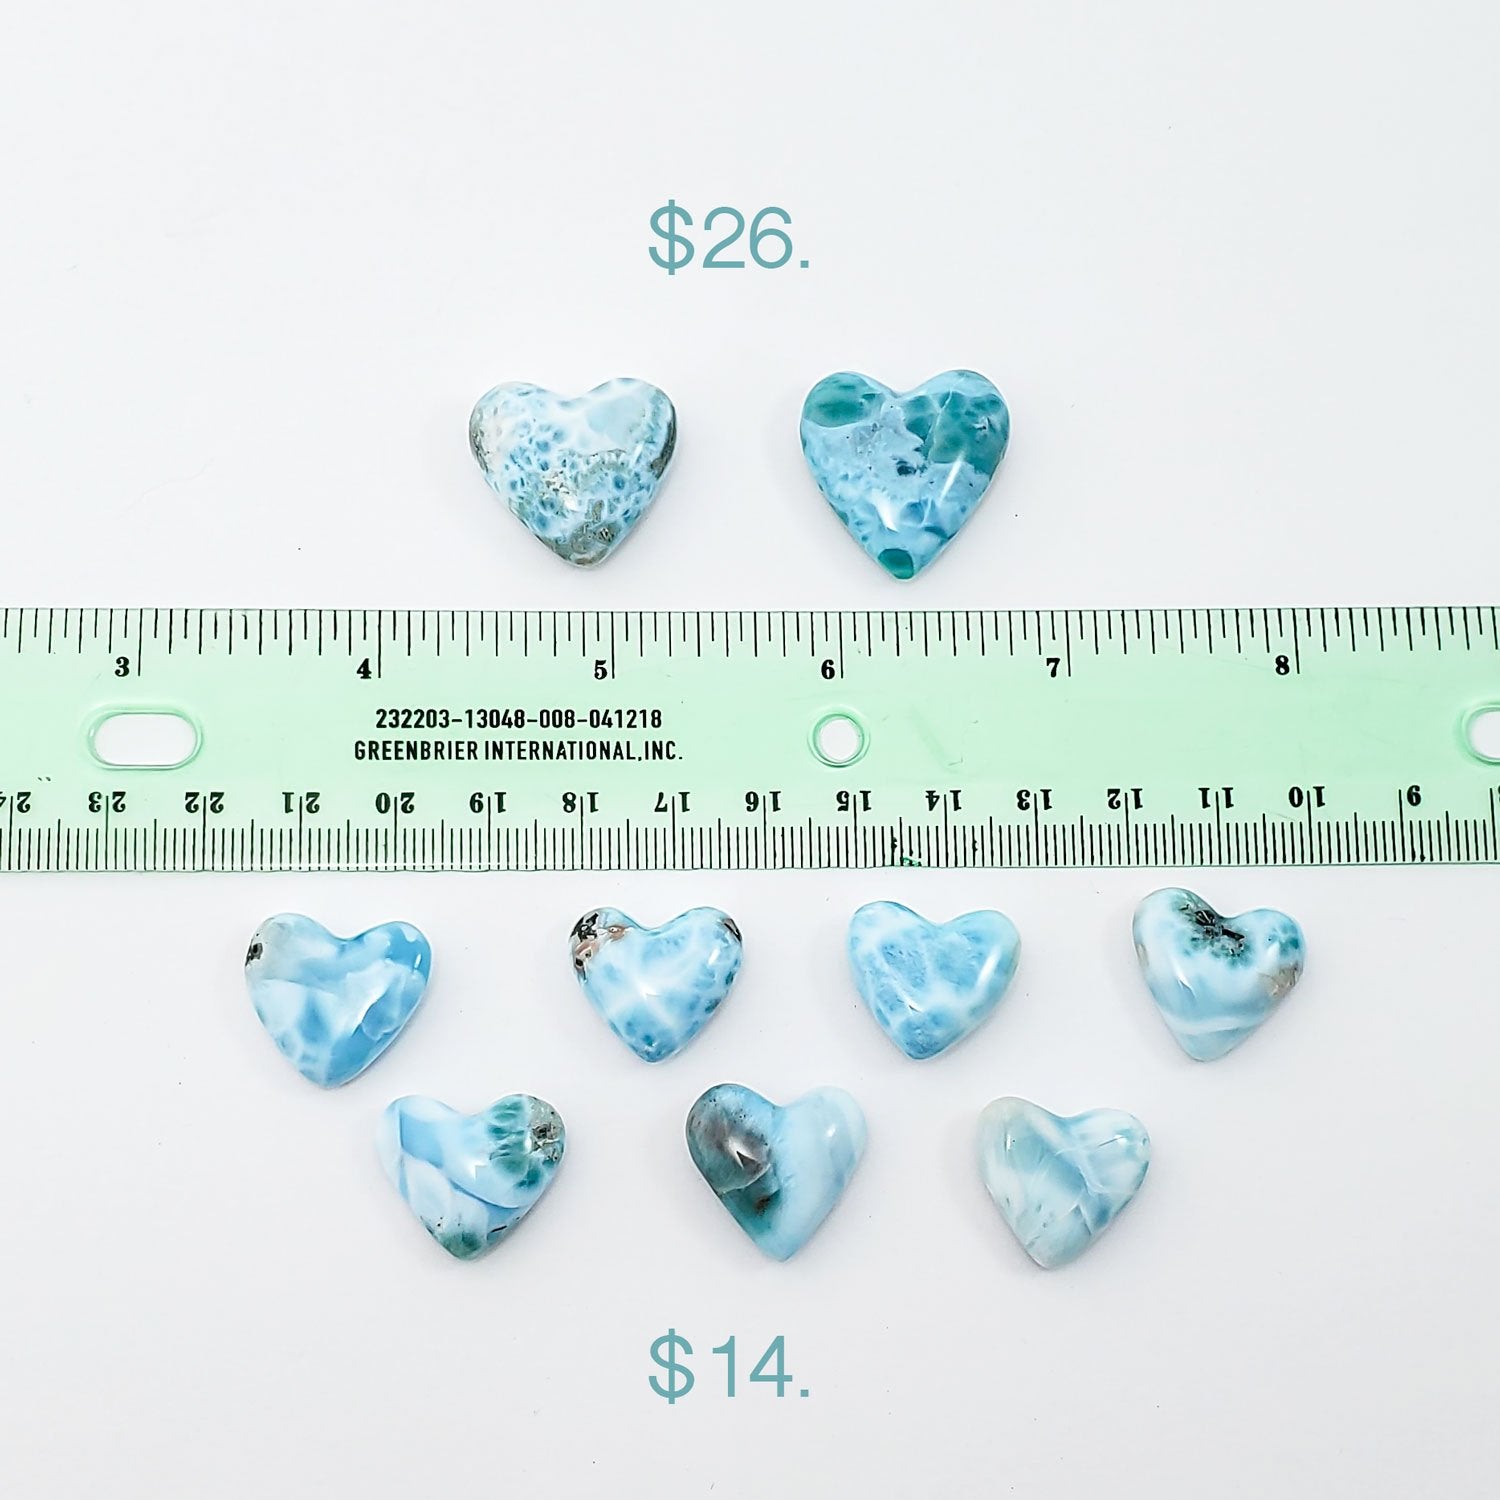 larimar serentiy hearts with ruler for size reference.